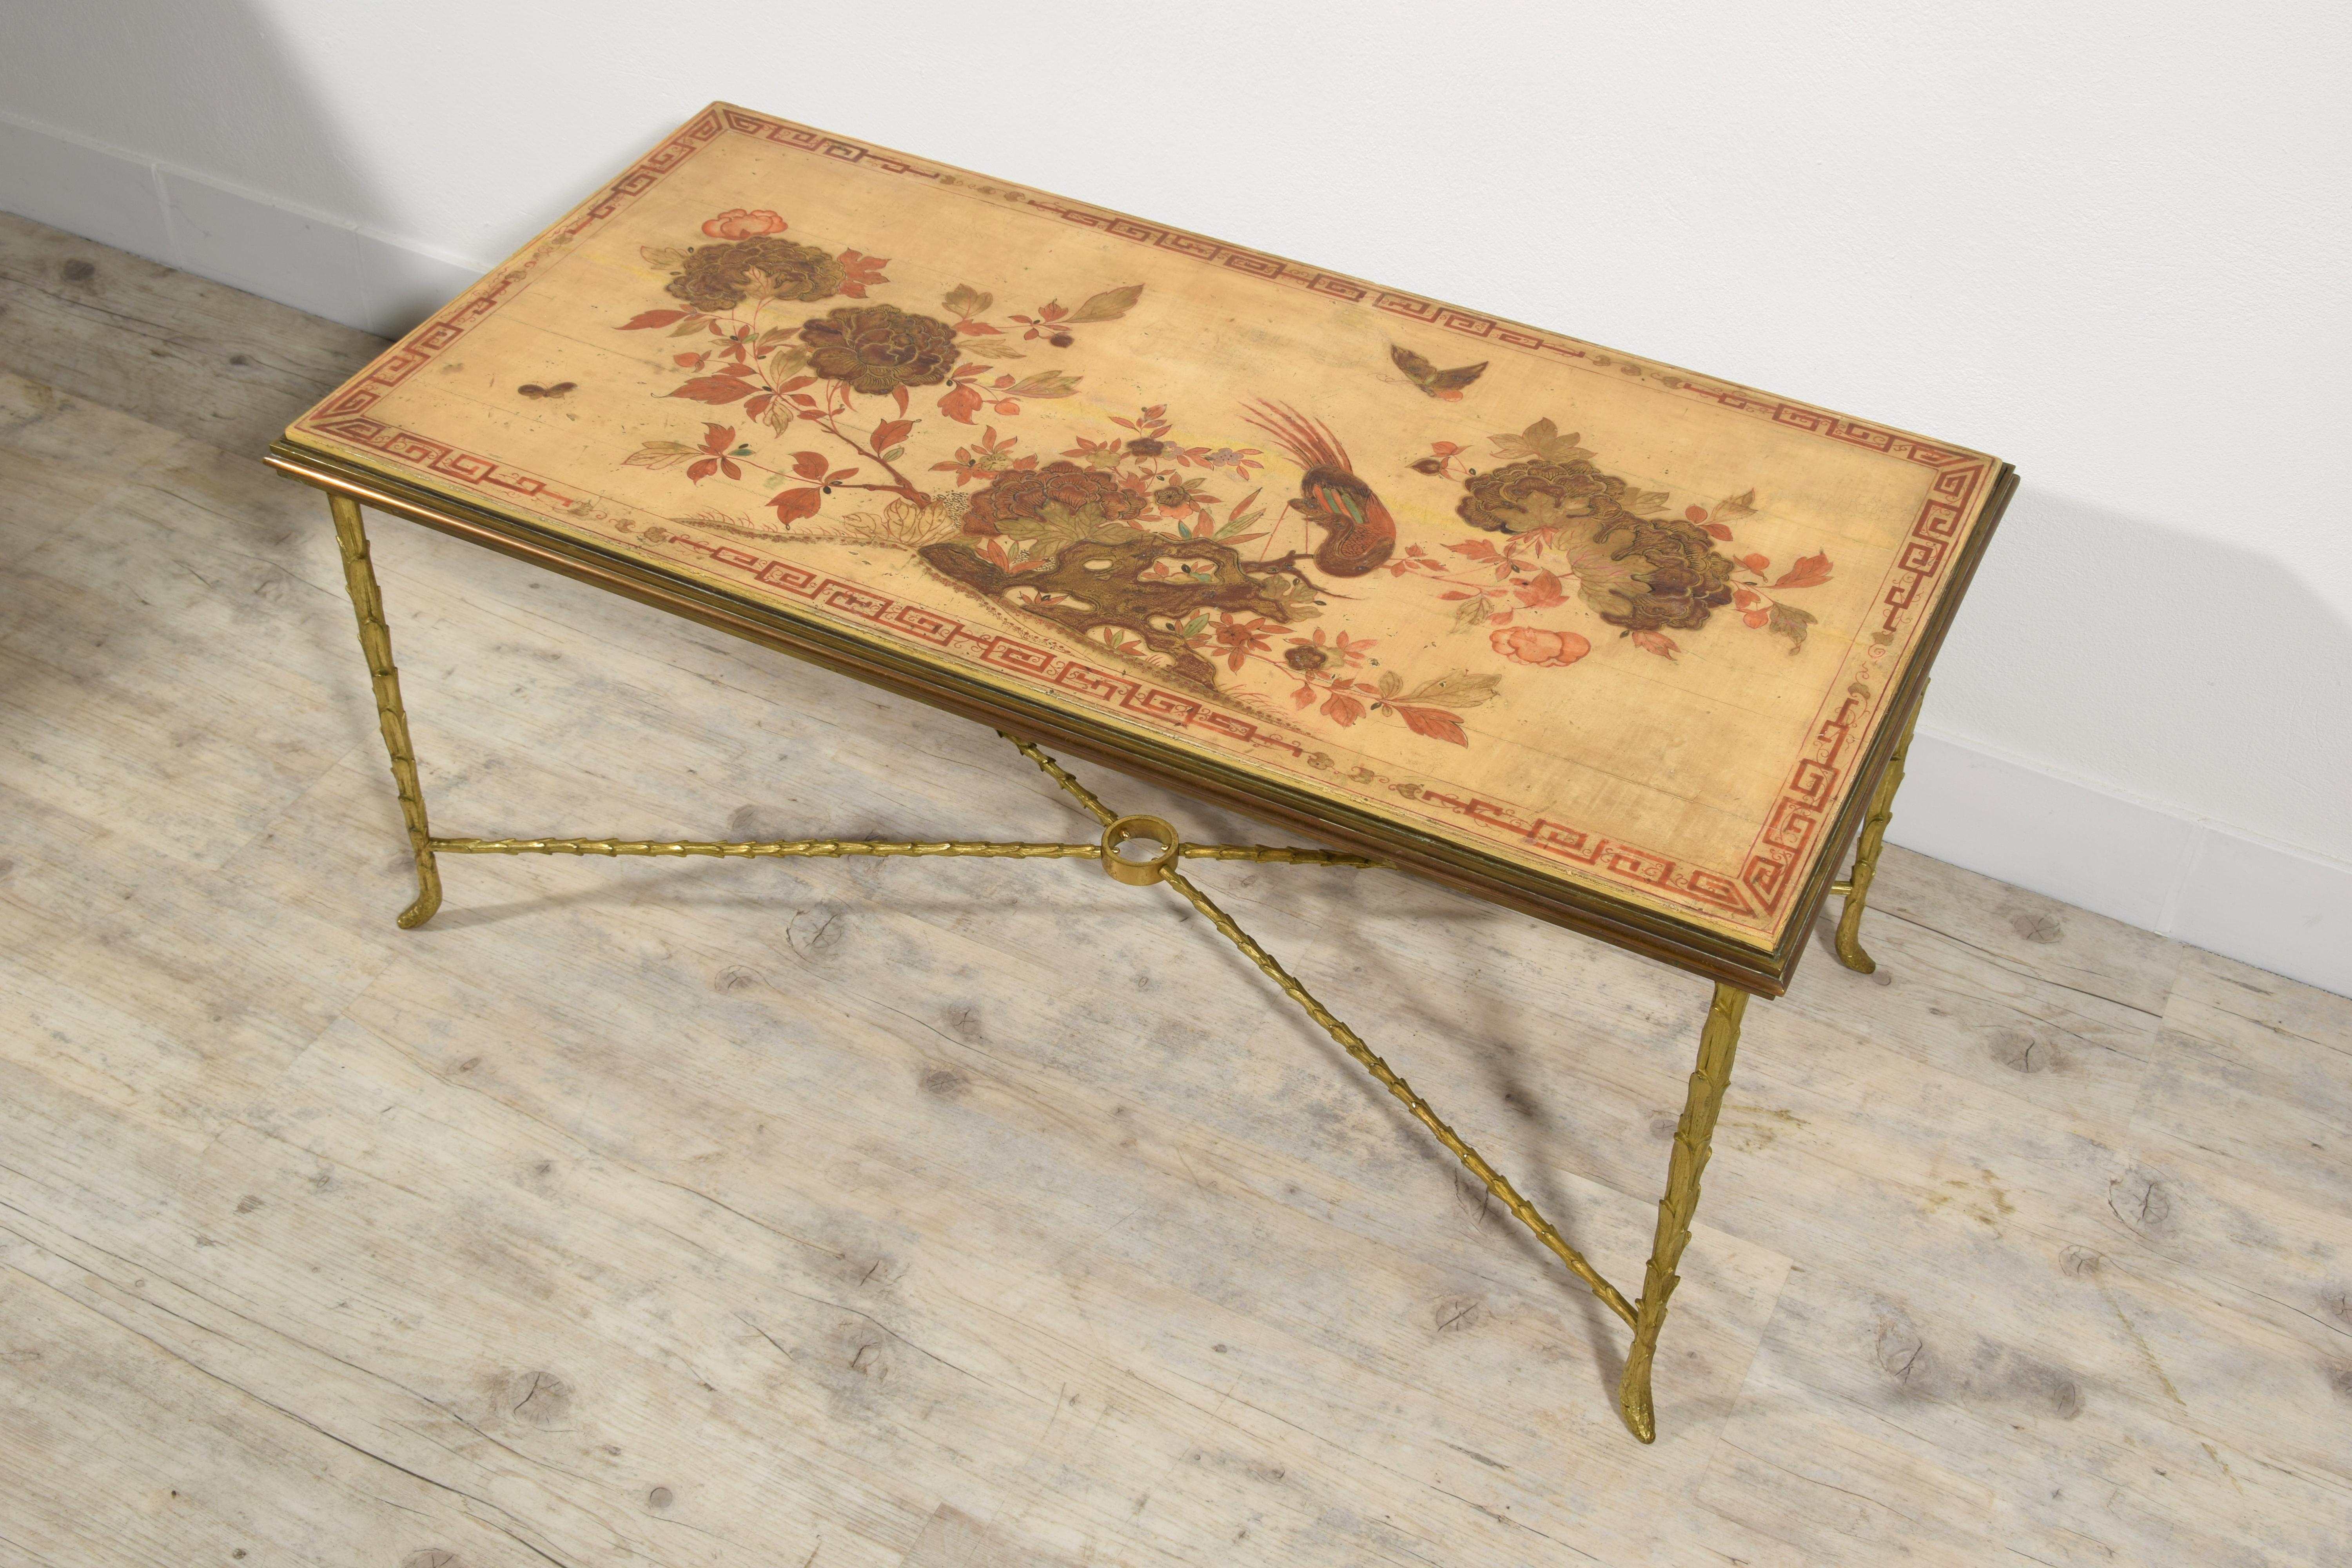 Gilt XX Century, French Gitl Bronze Lacquered Coffee Table by Maison Baguès